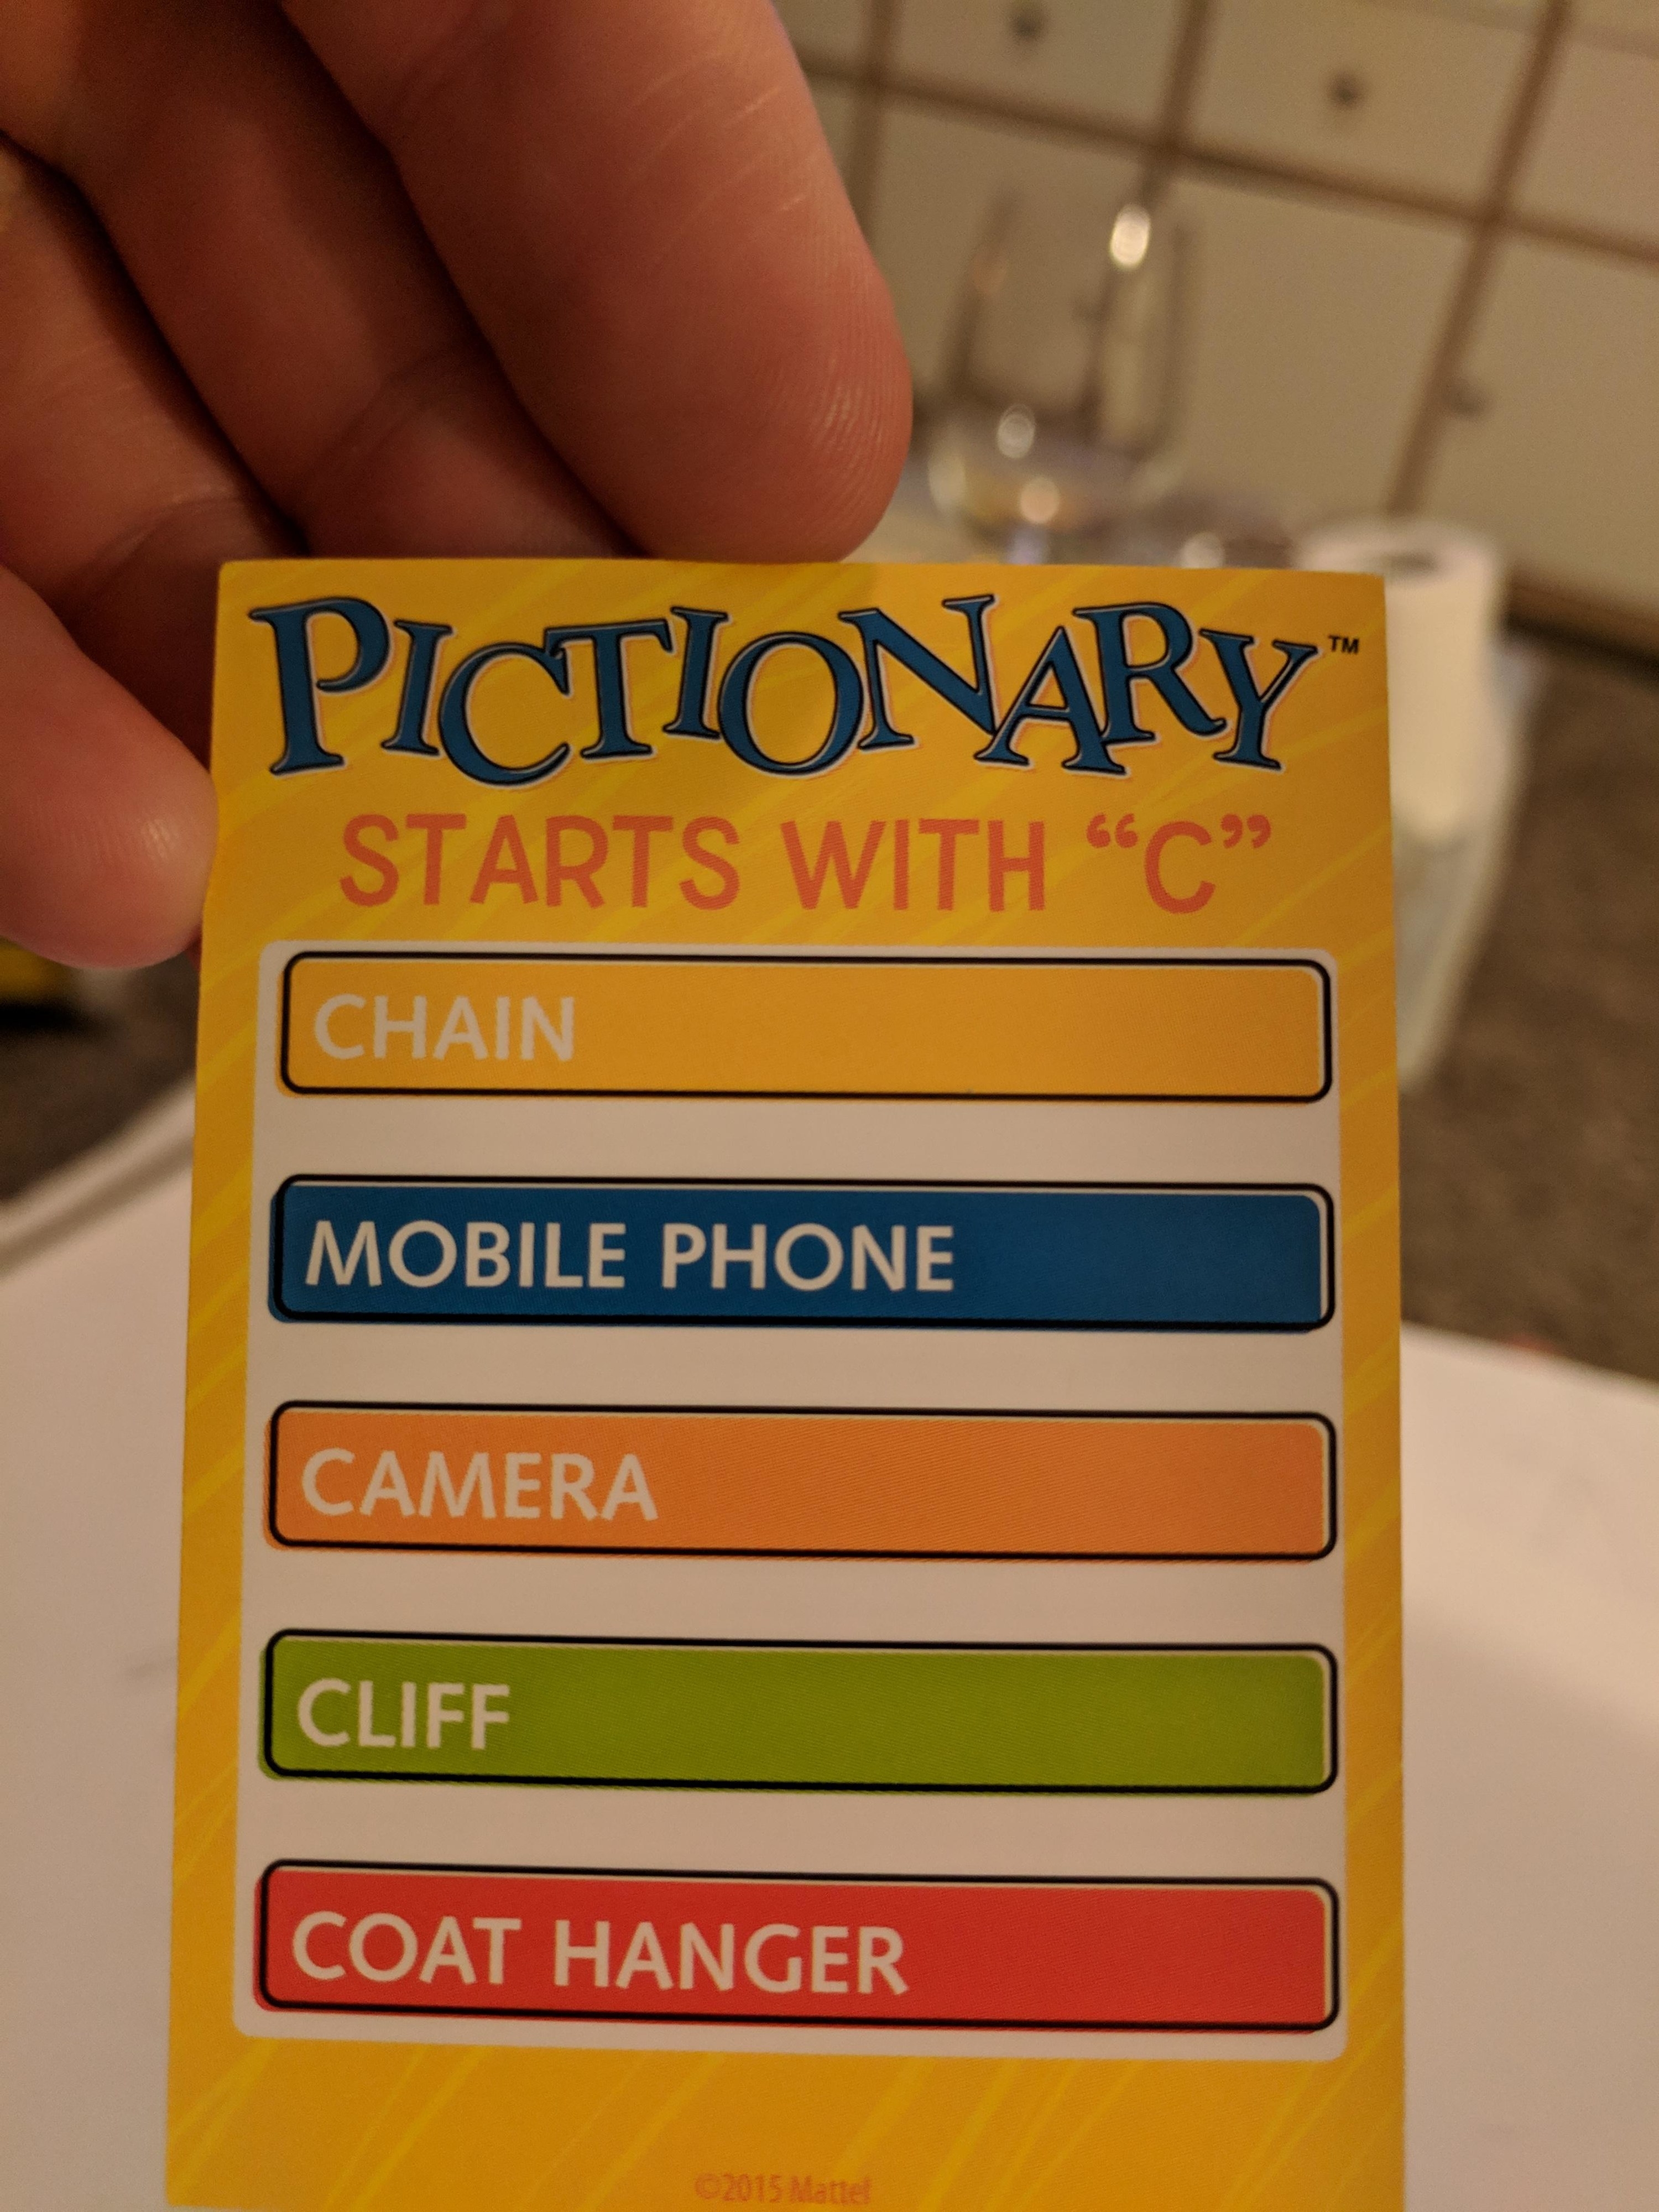 &quot;Pictionary starts with C,&quot; followed by &quot;Chain, mobile phone, camera, cliff, and coat hanger&quot;